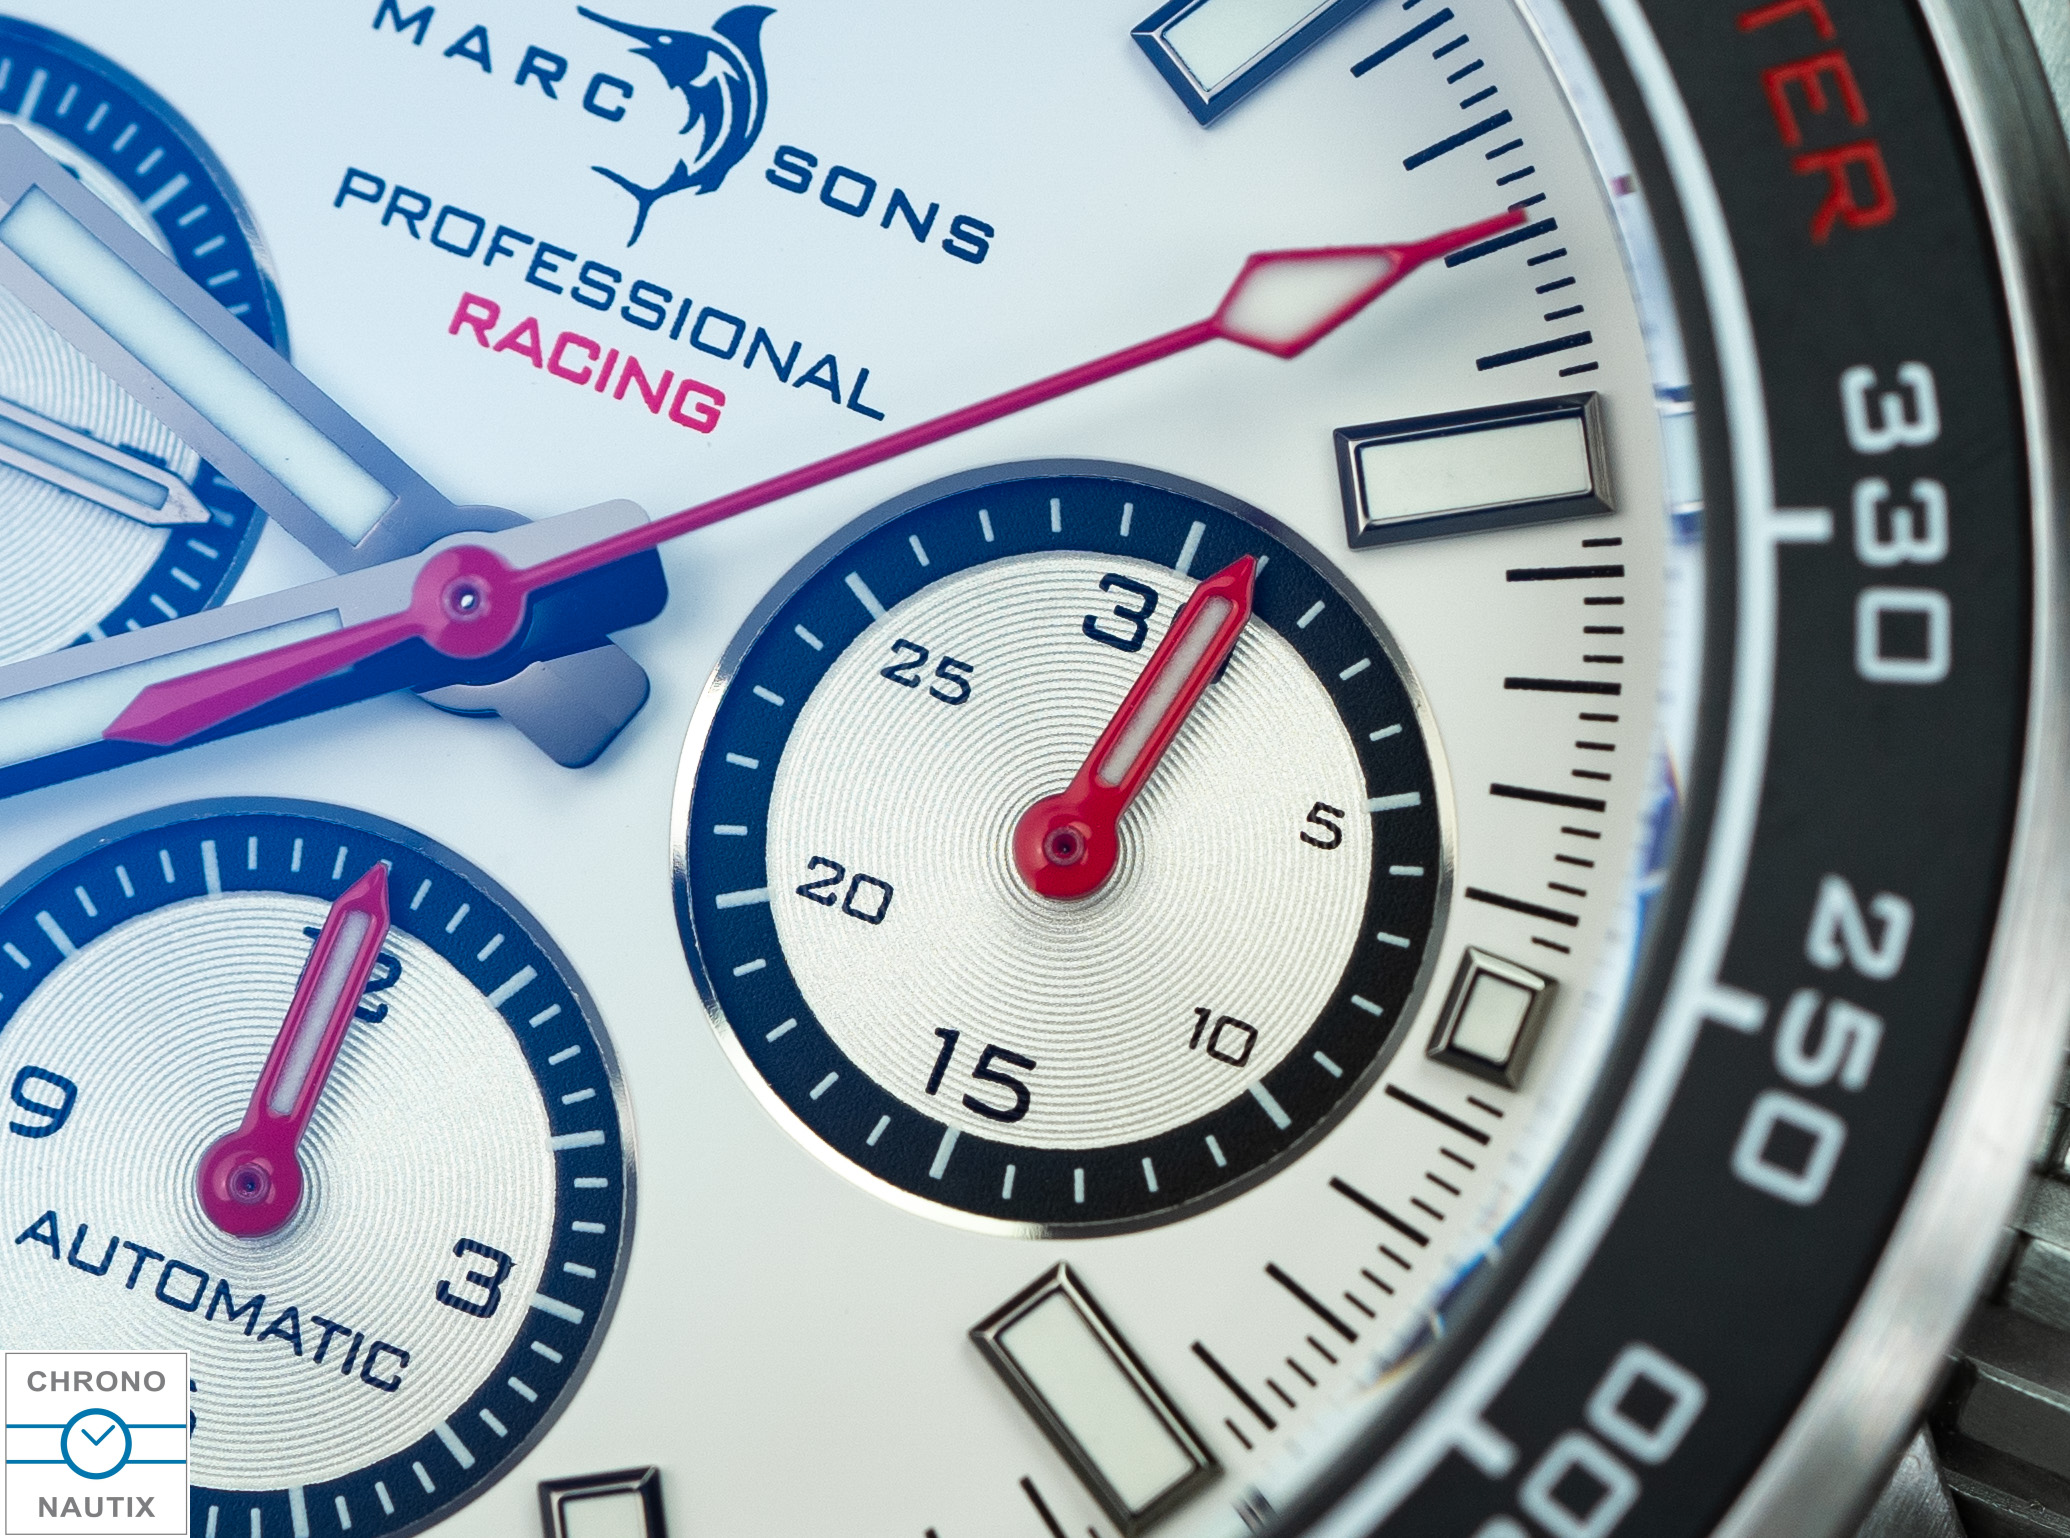 Marc Sons Racing Chronograph 43 mm Tricompax 13